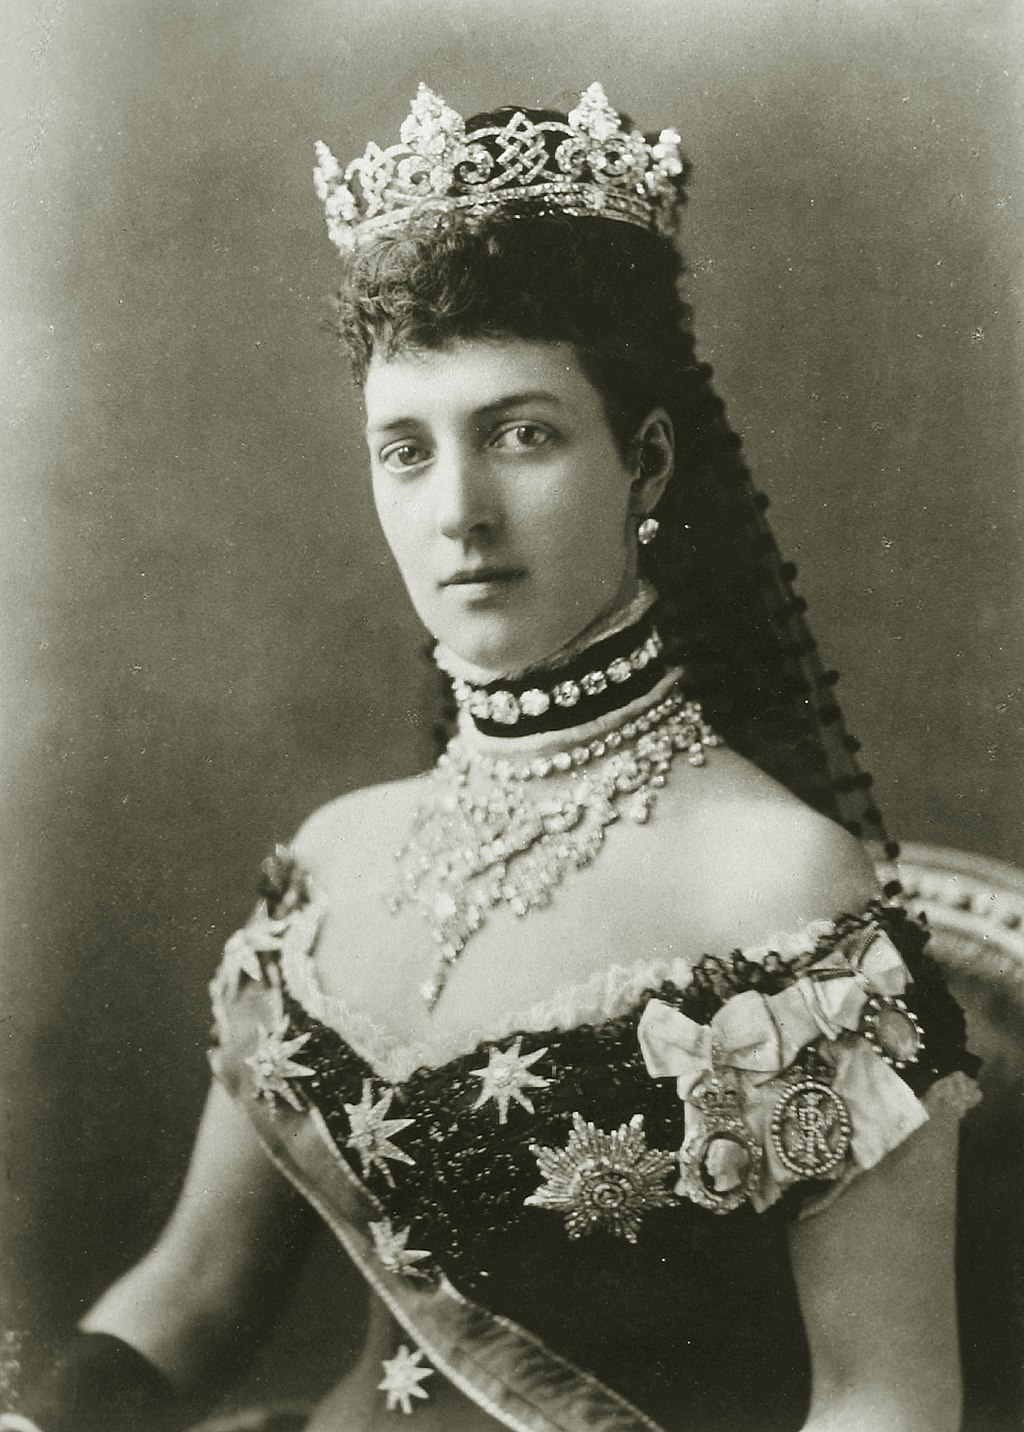 Kristin Holt | Victorian-era Hair Care. Photograph of Alexandra of Denmark, Princess of Wales, later Queen consort of the United Kingdom. Image: Wikimedia, Public Domain.